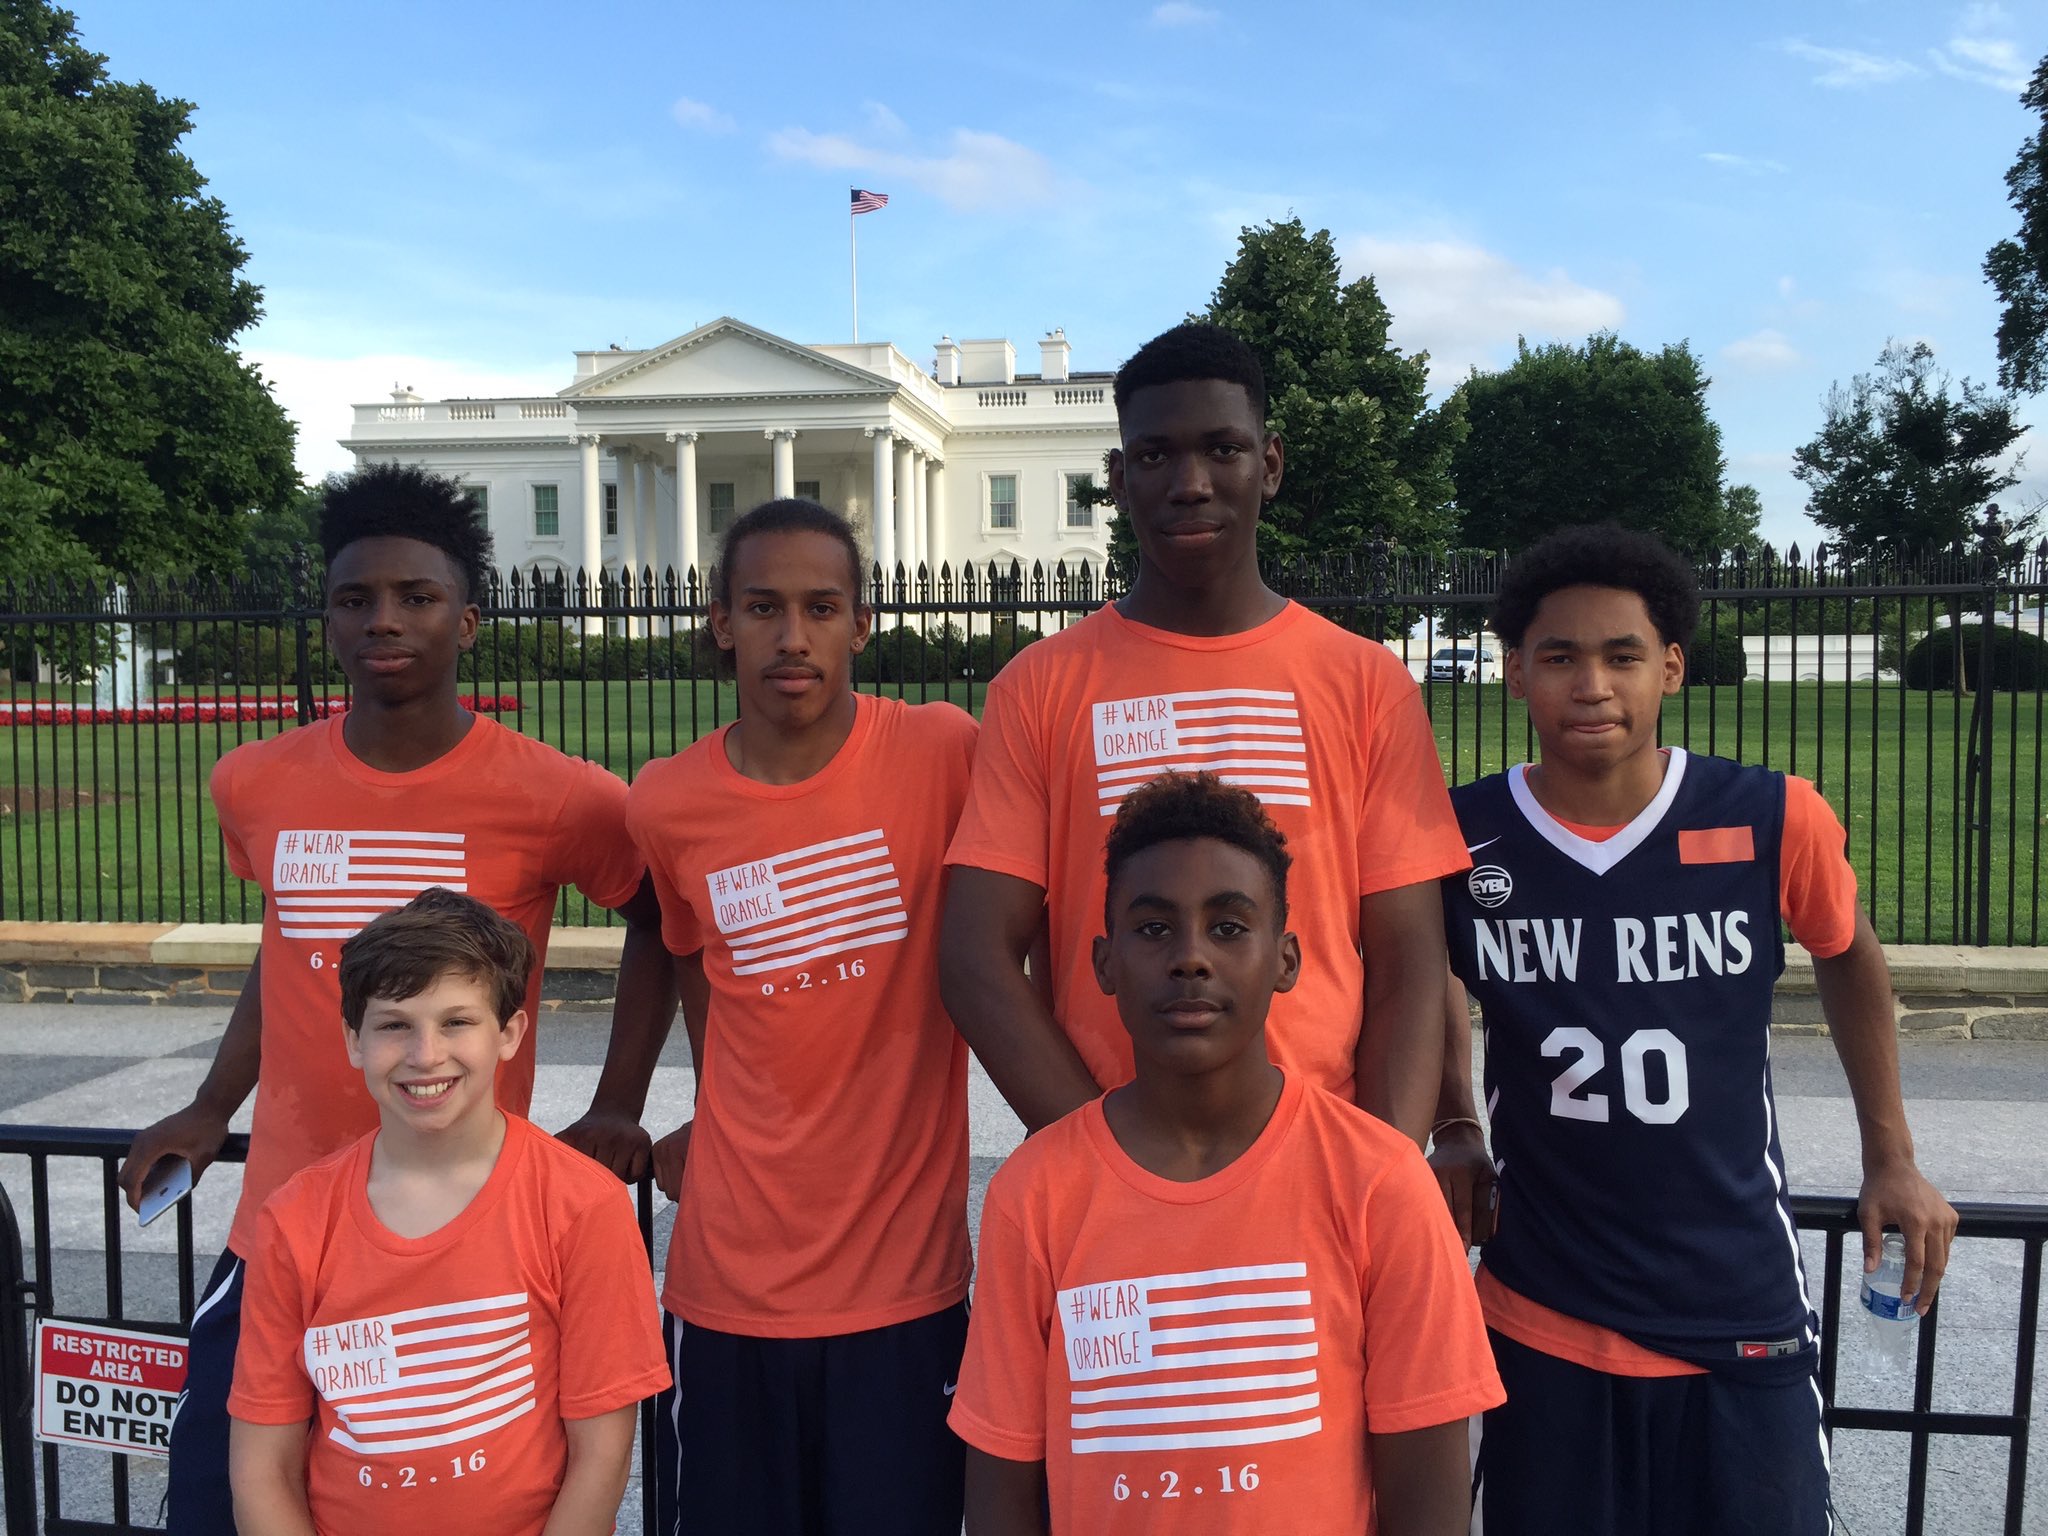 NY RENS players were honored at the White House. (Photo: NY RENS)